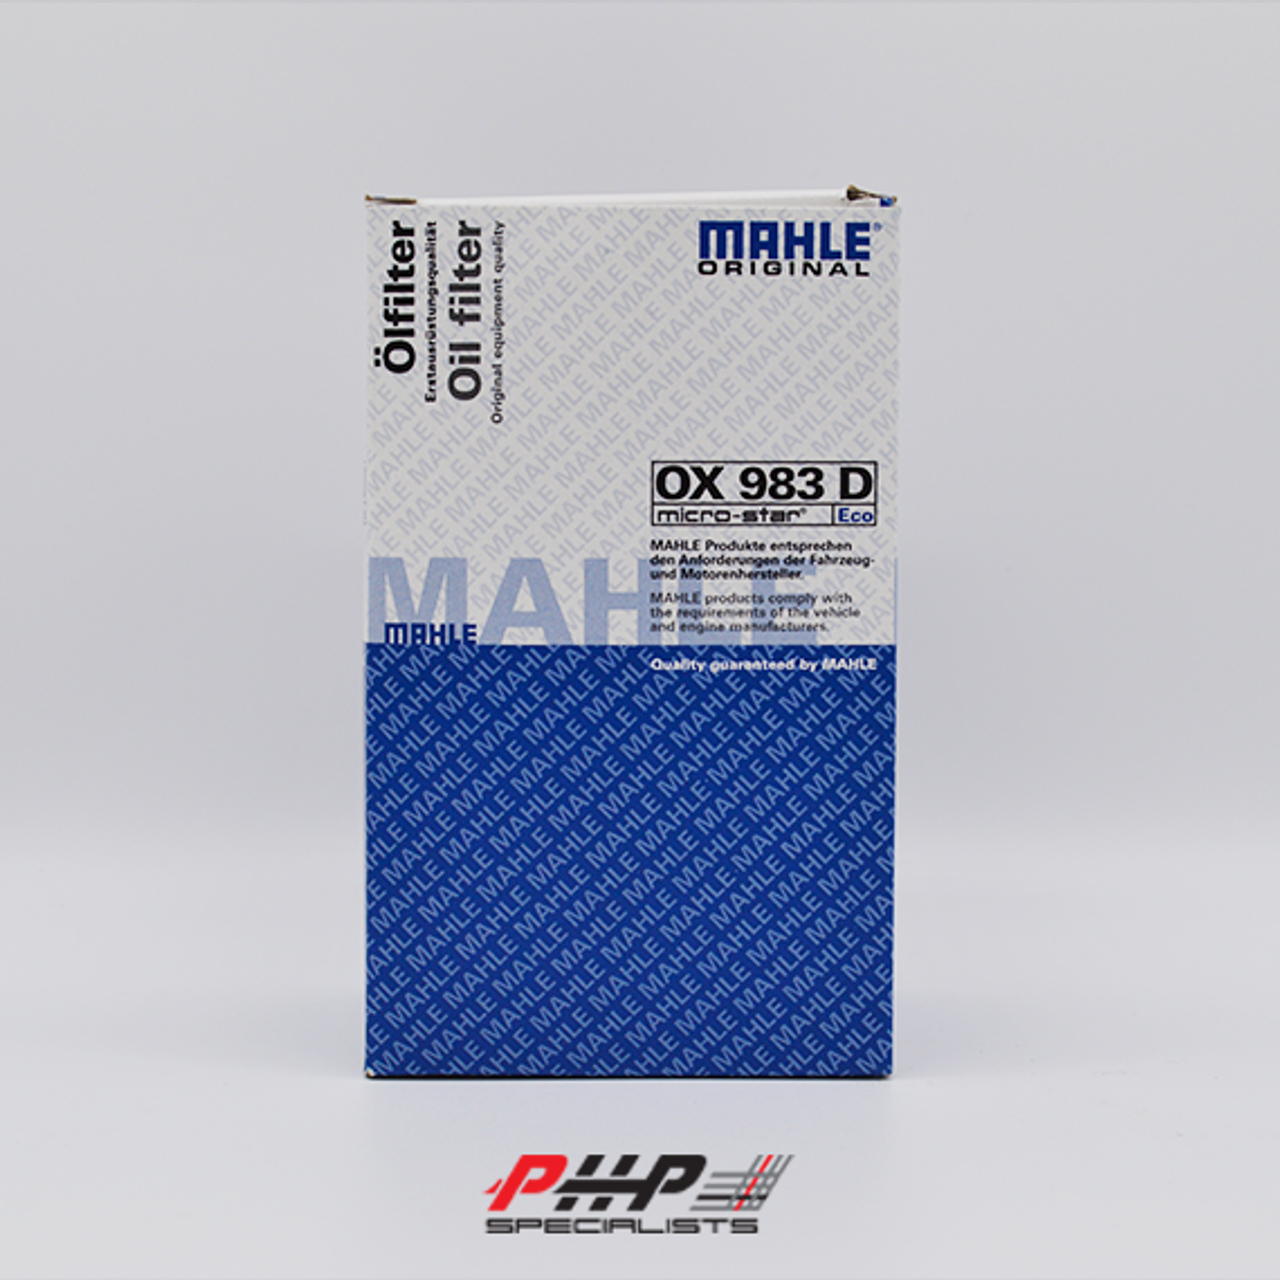 Mahle Oil Filter - 03H 115 562